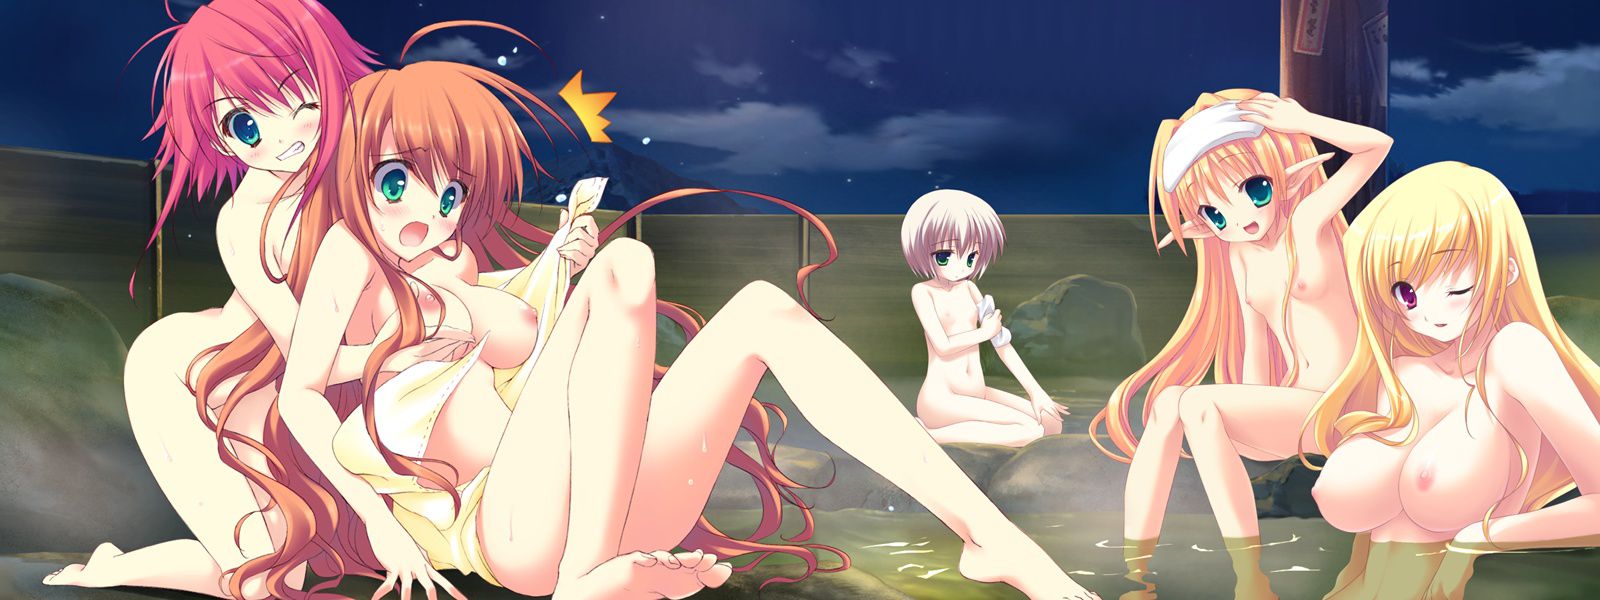 WIZARD GIRL AMBITIOUS [HCG 18 eroge] wallpapers, images 2